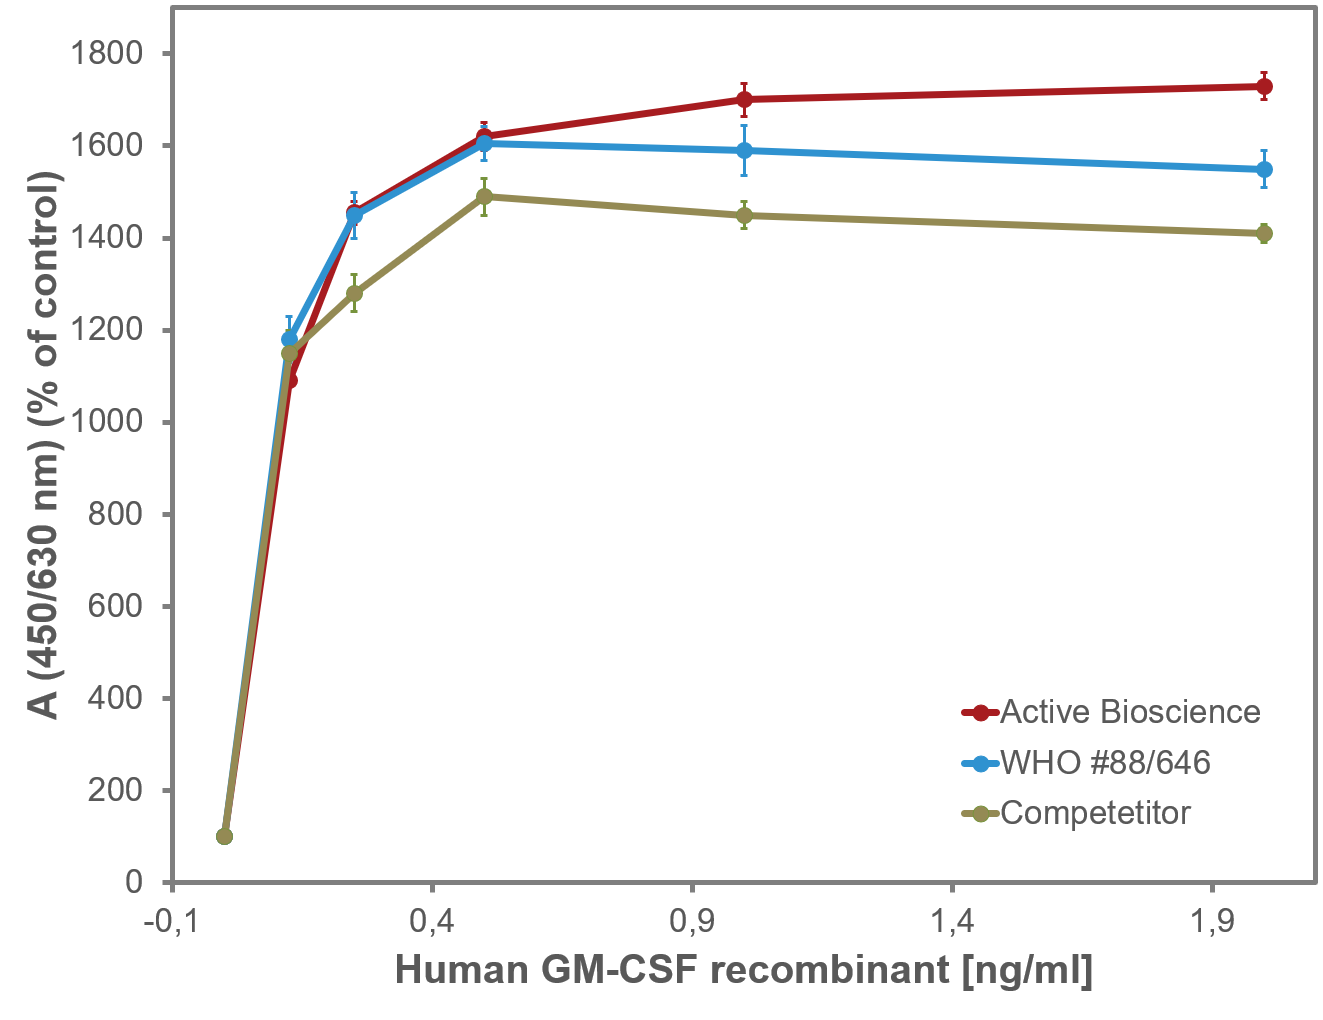 <strong>Fig. 2</strong>: Dose-dependent stimulation of cell proliferation in TF-1 cells by recombinant Human GM-CSF, cct-premium and the WHO standard 88/646. Values are the means (±SD) of triplicate determinations and expressed as percentage of control.